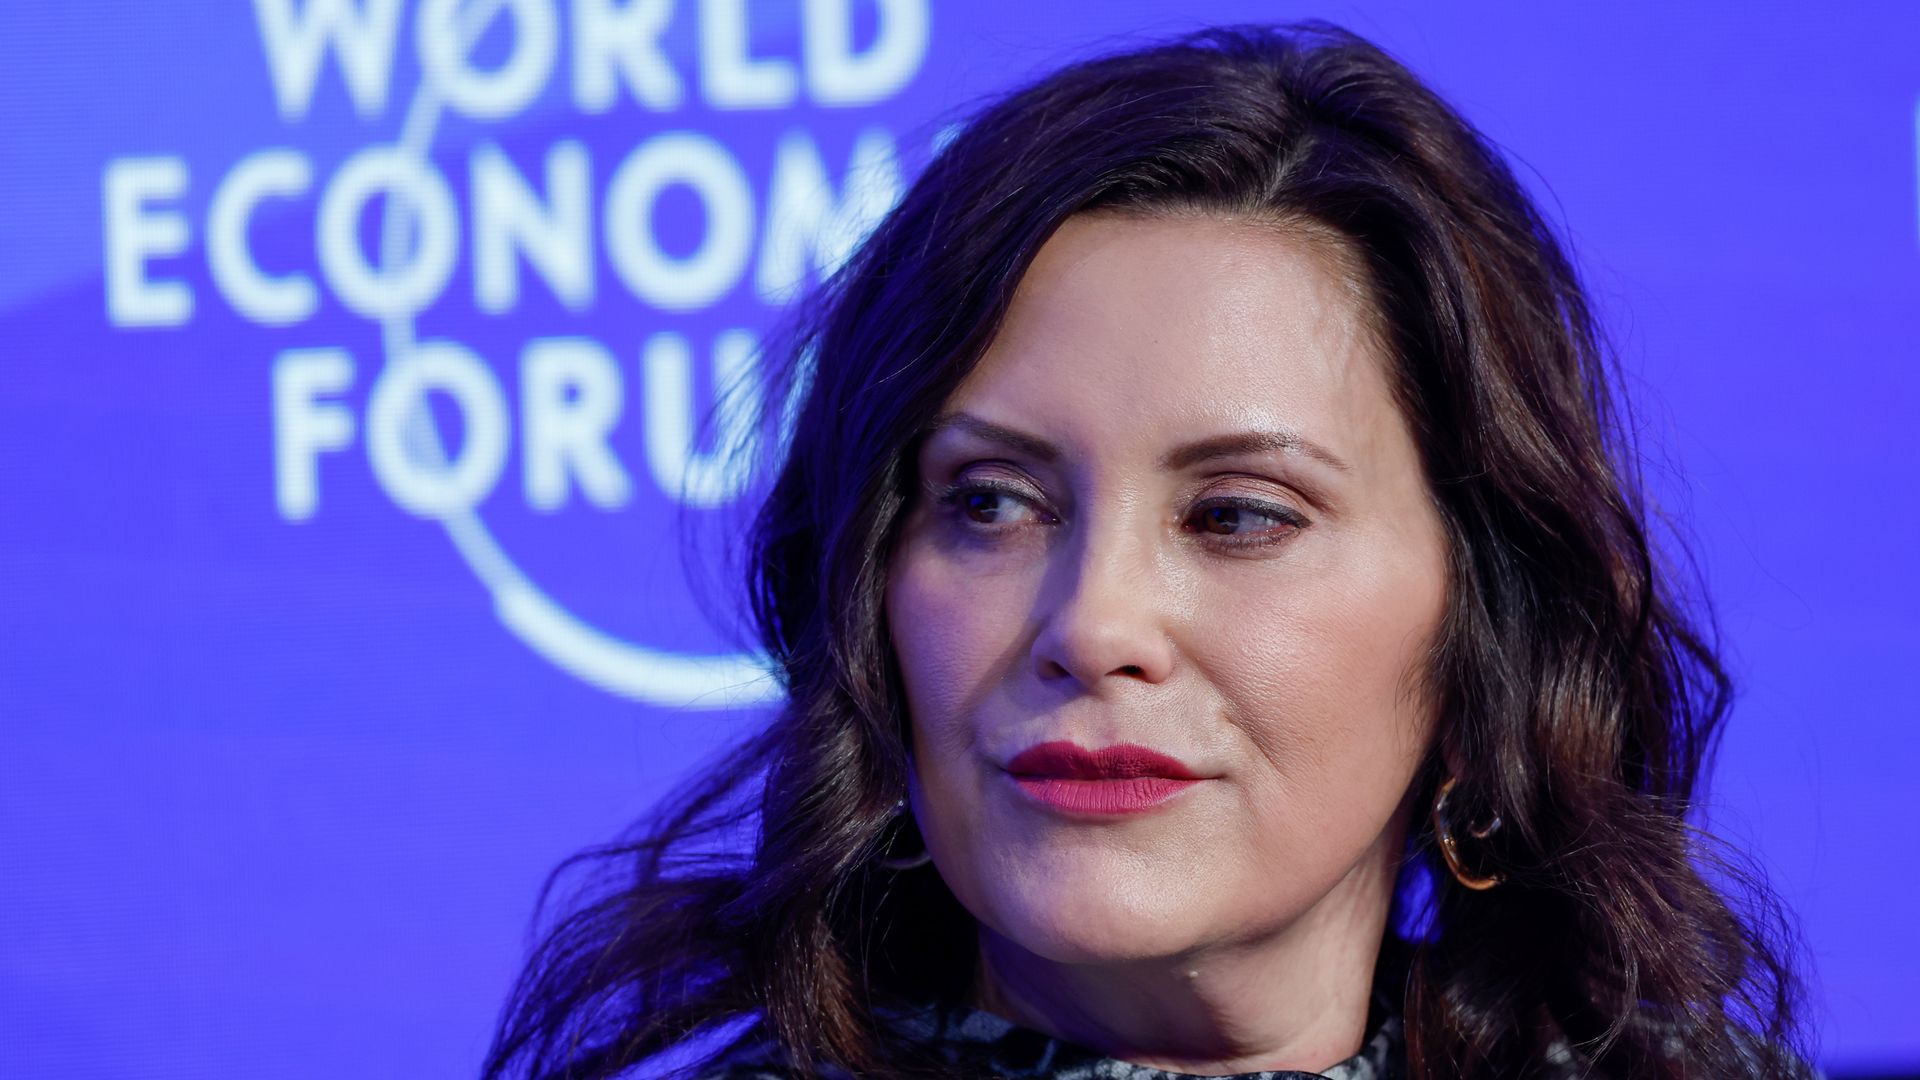 Gov. Gretchen Whitmer during a panel session on the opening day of the World Economic Forum in Davos, Switzerland, on Jan. 17. Photo: Stefan Wermuth/Bloomberg via Getty Images